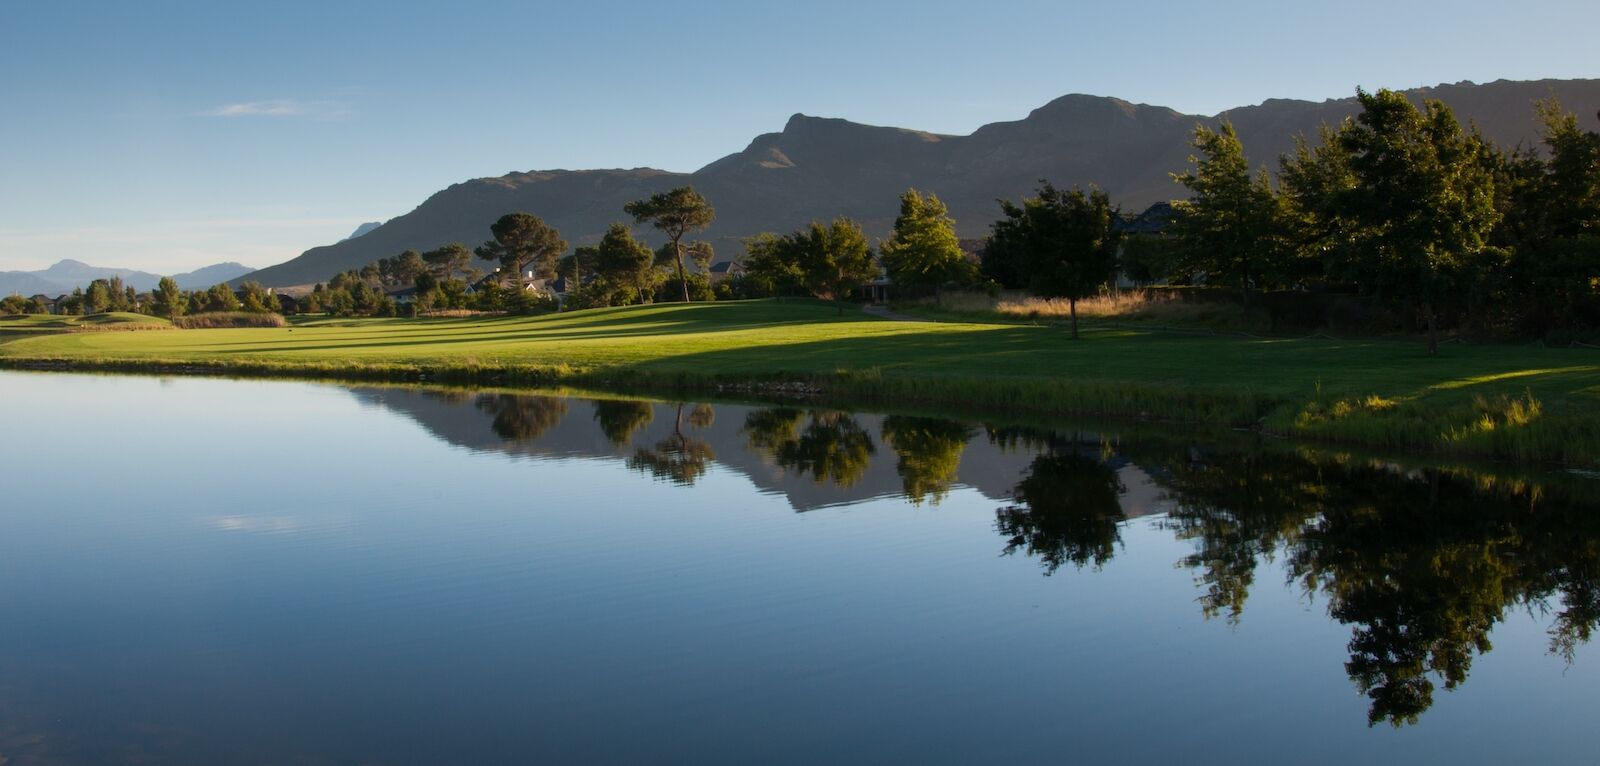 Pearl Valley audubon golf course, south africa